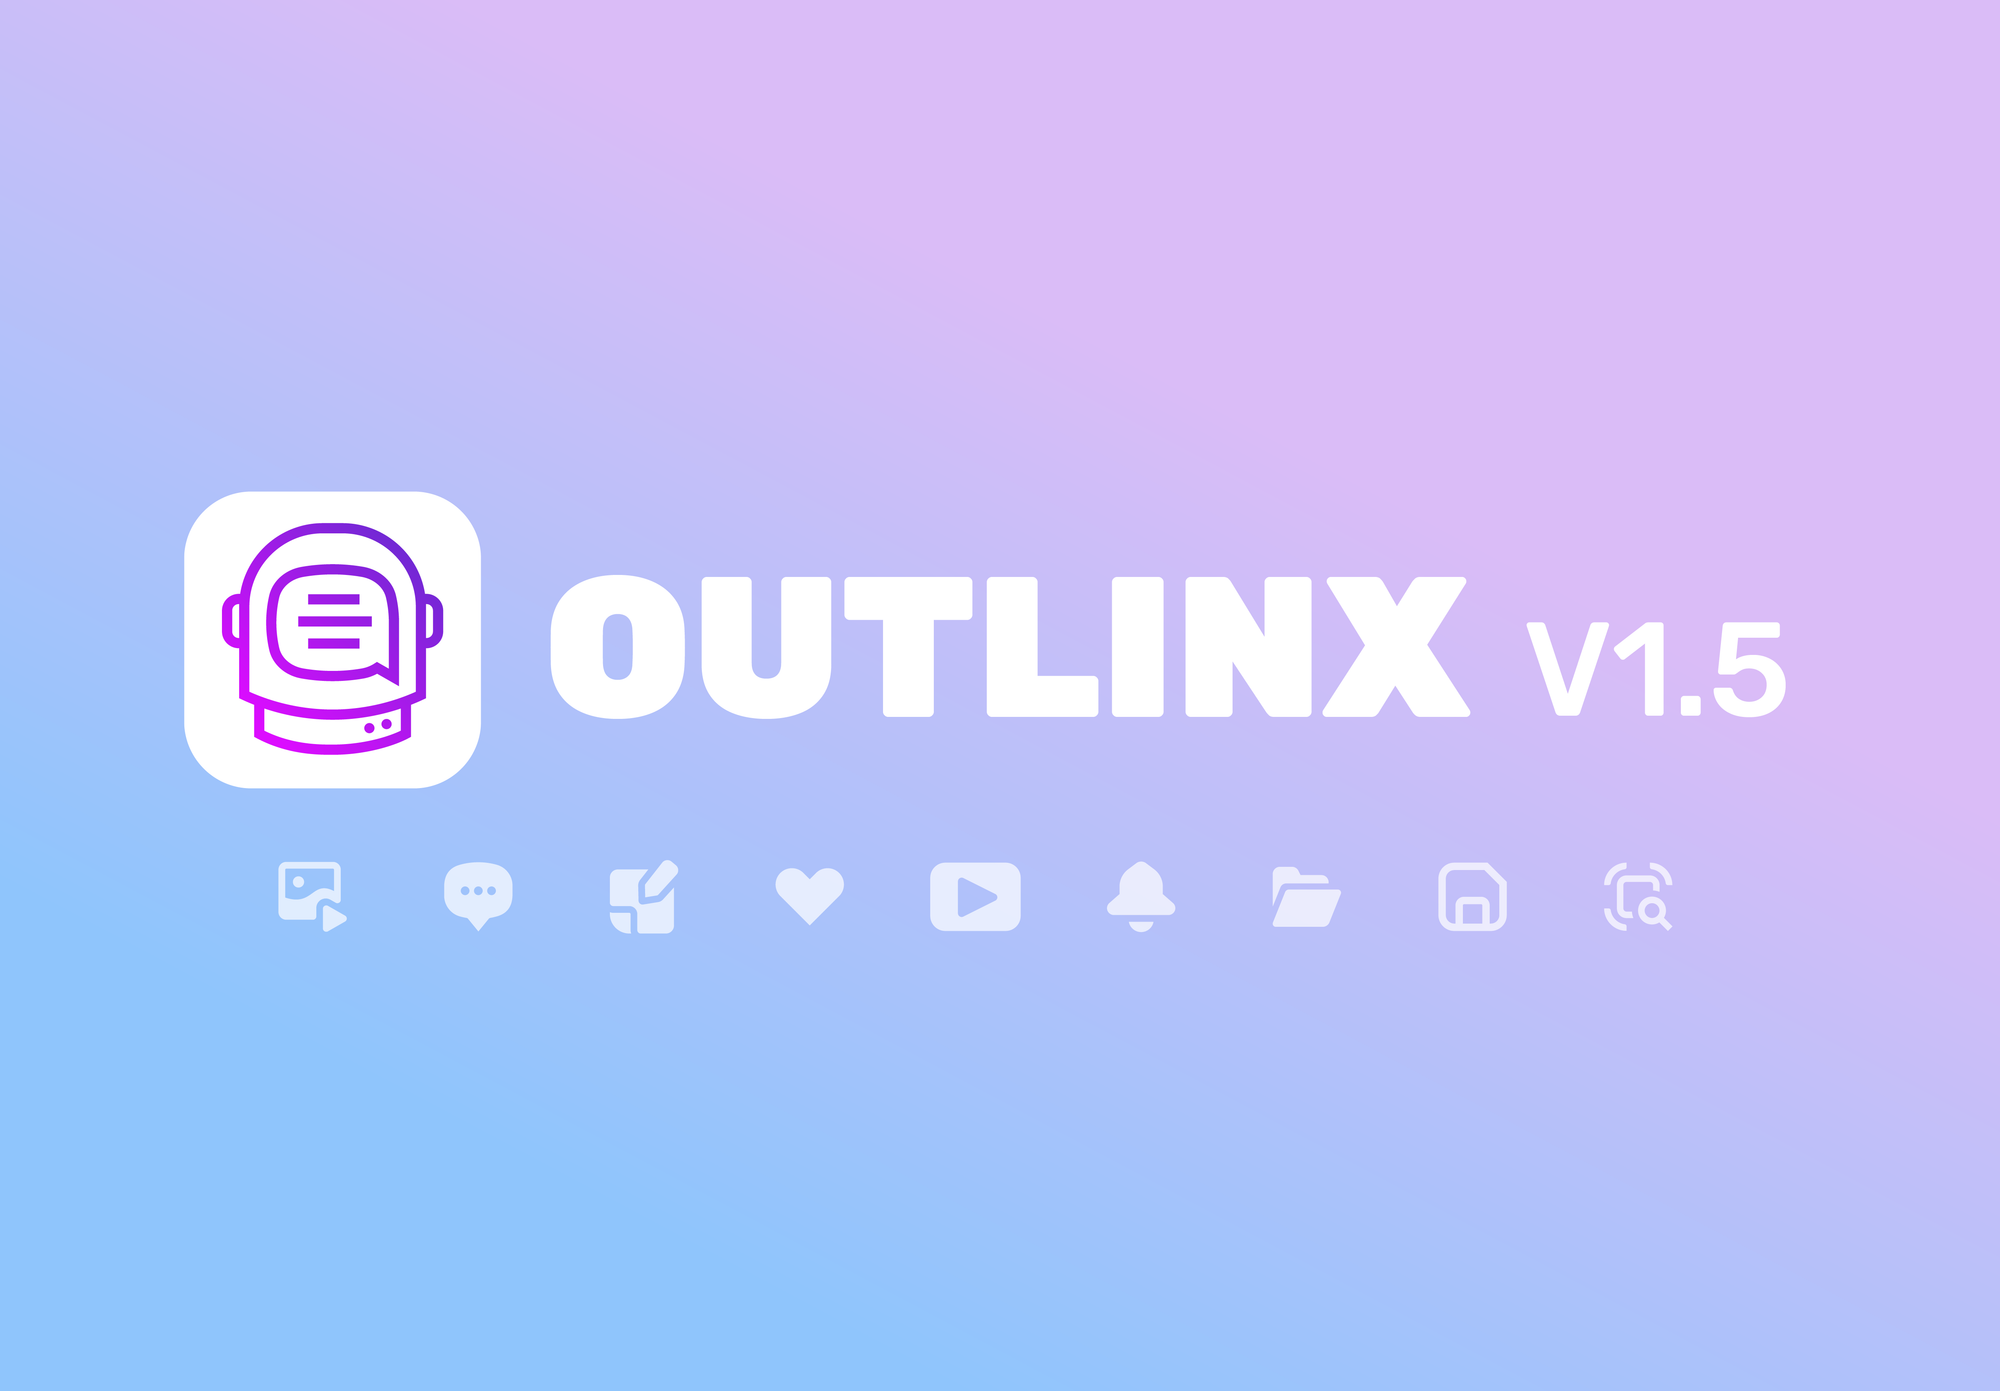 Outlinx v1.5 Launch! We Added Some Features You Asked For.